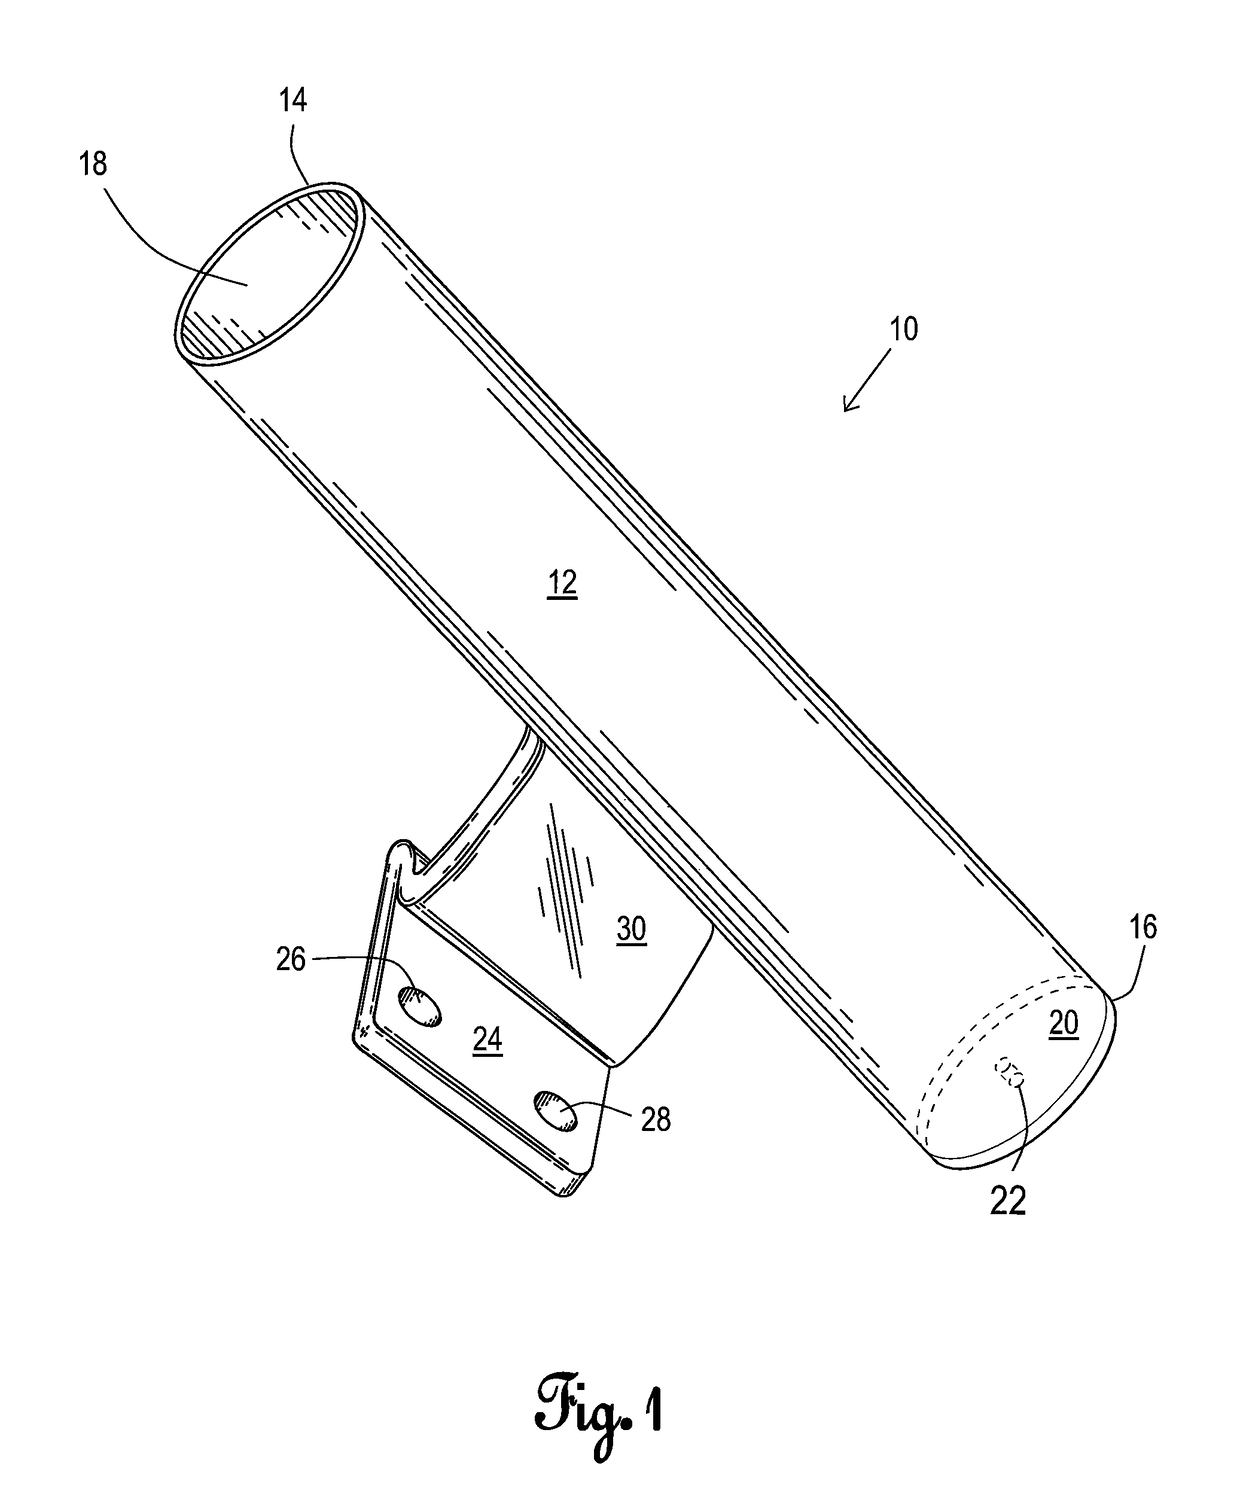 Method of mounting a flag holder mount onto a motorcycle